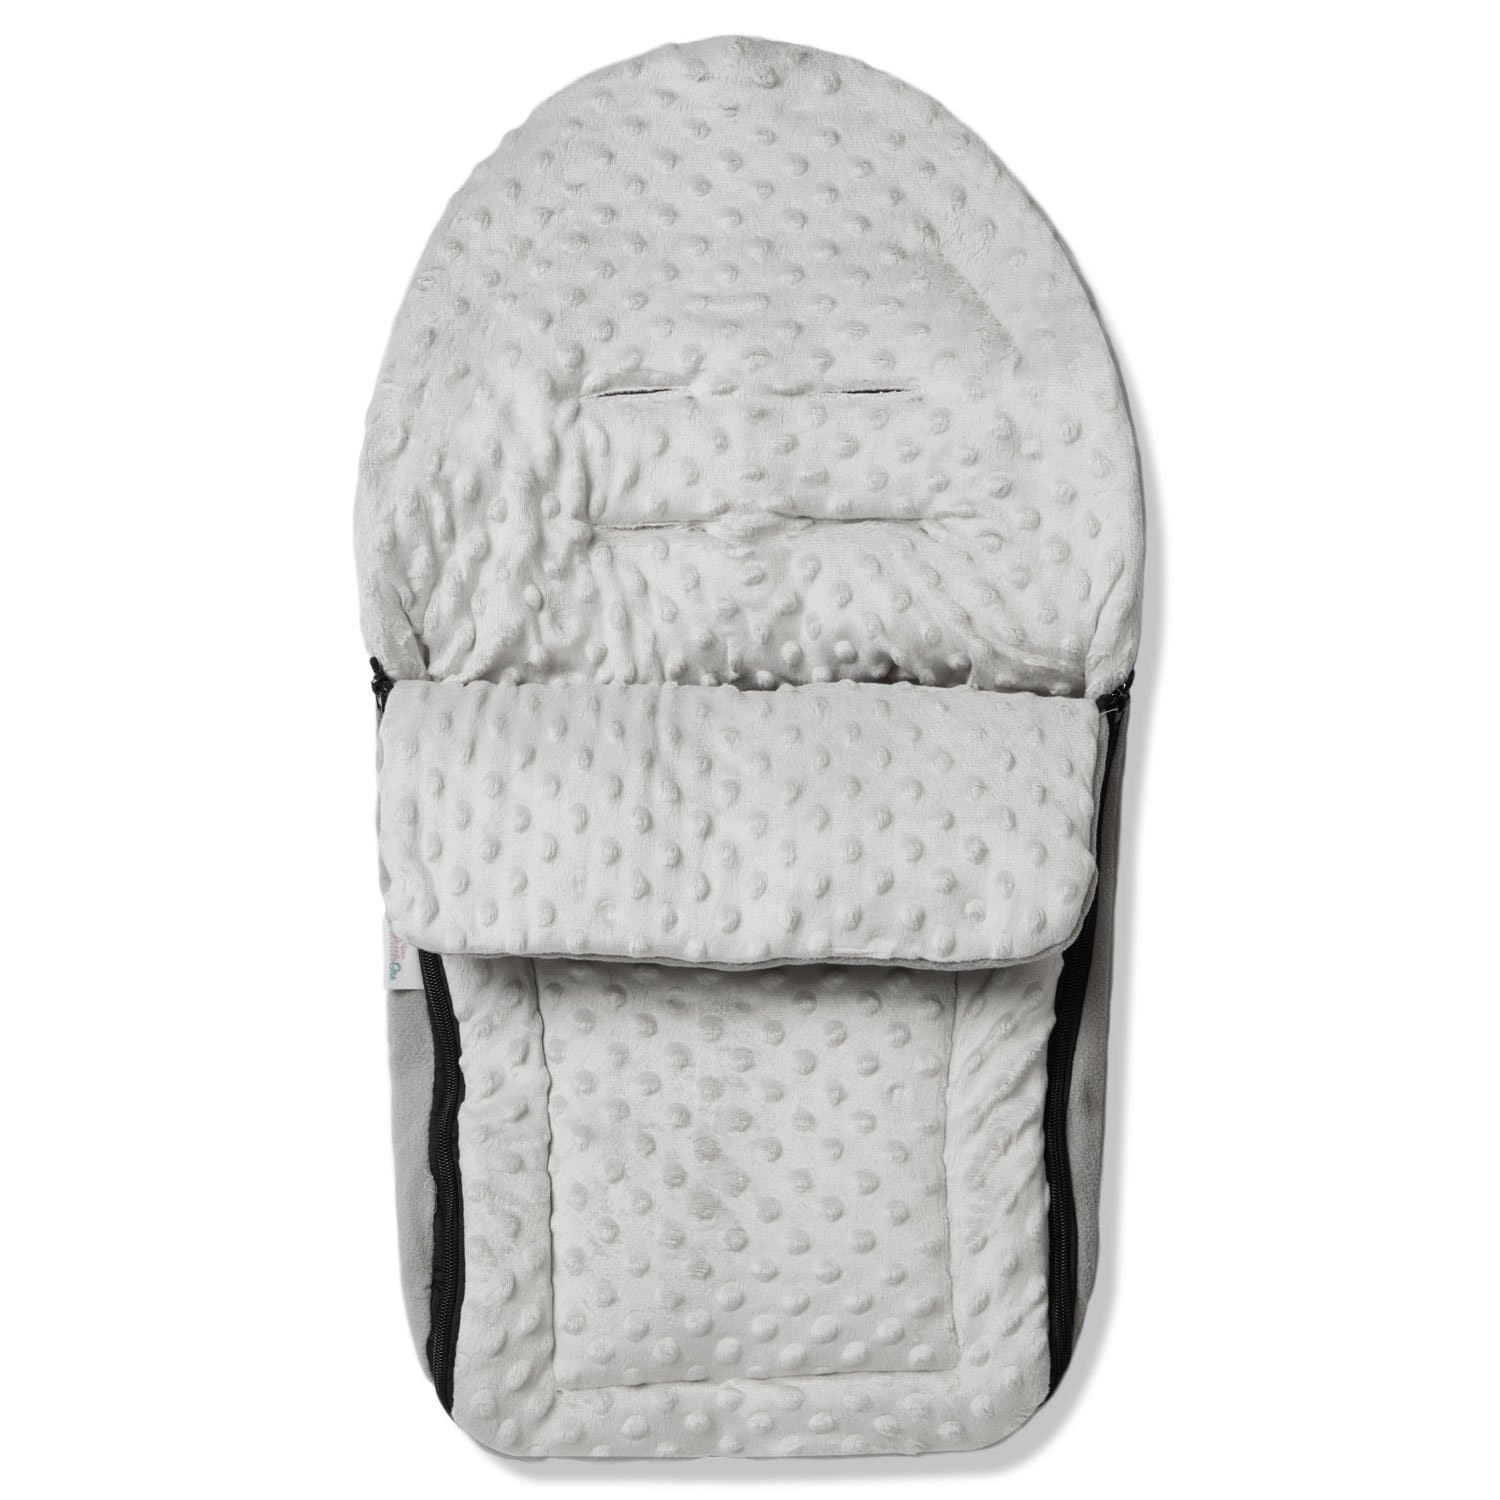 Dimple Car Seat Footmuff / Cosy Toes Compatible with Cybex - Grey / Fits All Models | For Your Little One